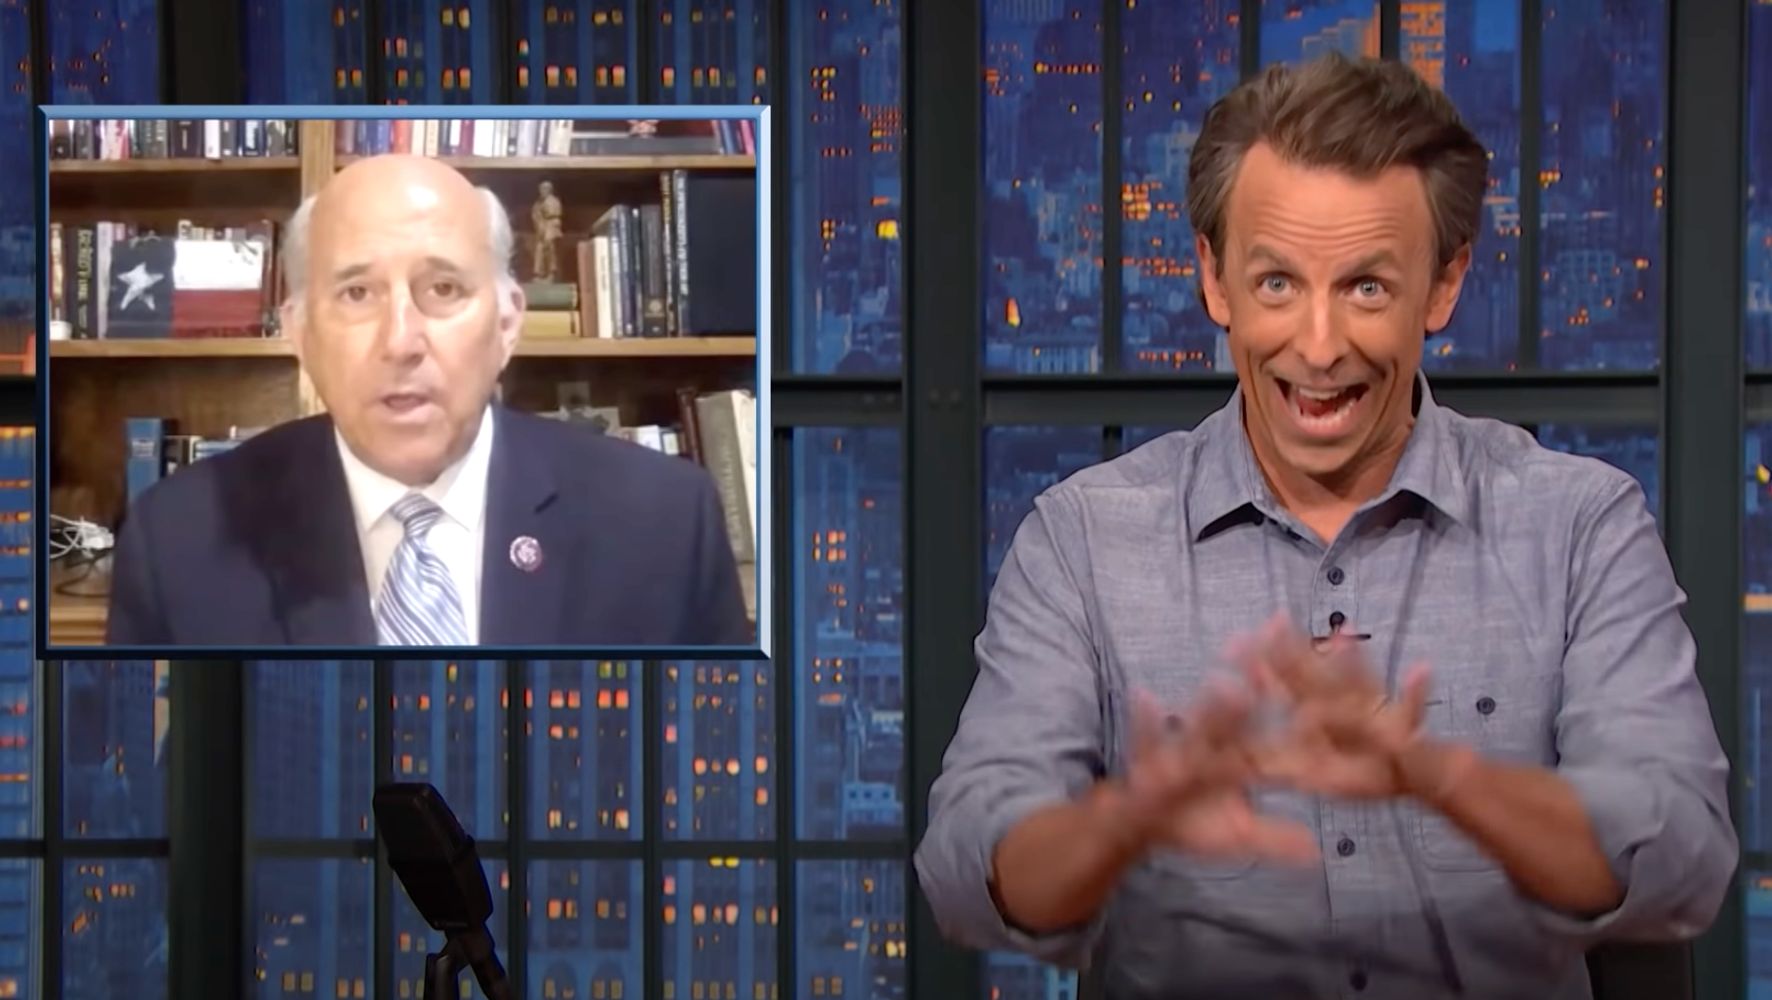 Seth Meyers: Rep. Louie Gohmert's Orbit Question Was Dumb Whichever Way You Look At It